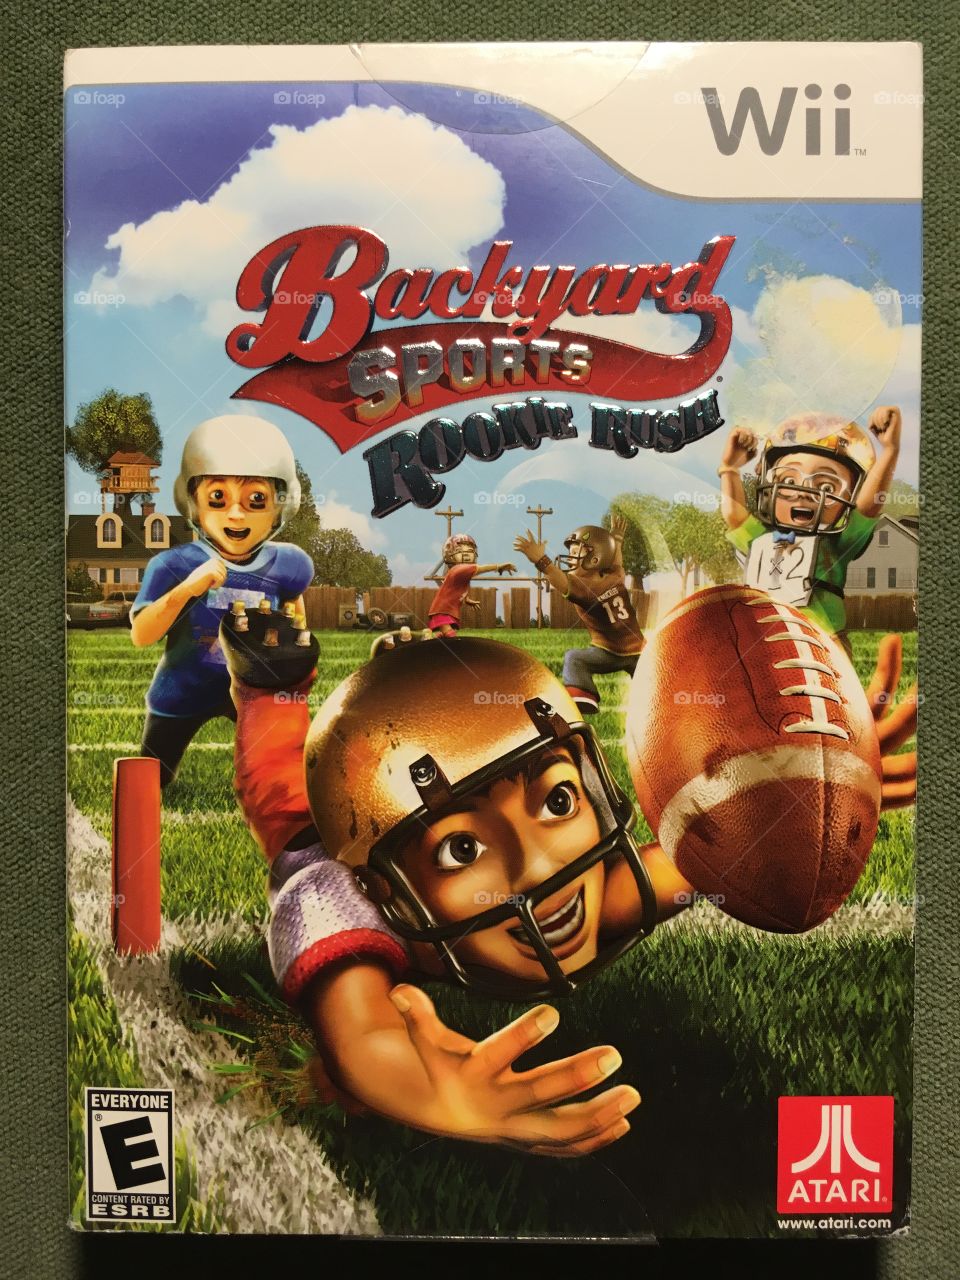 Backyard Sports Rookie Rush 
Video game for Nintendo Wii
Brand New Sealed 
Released - 2010